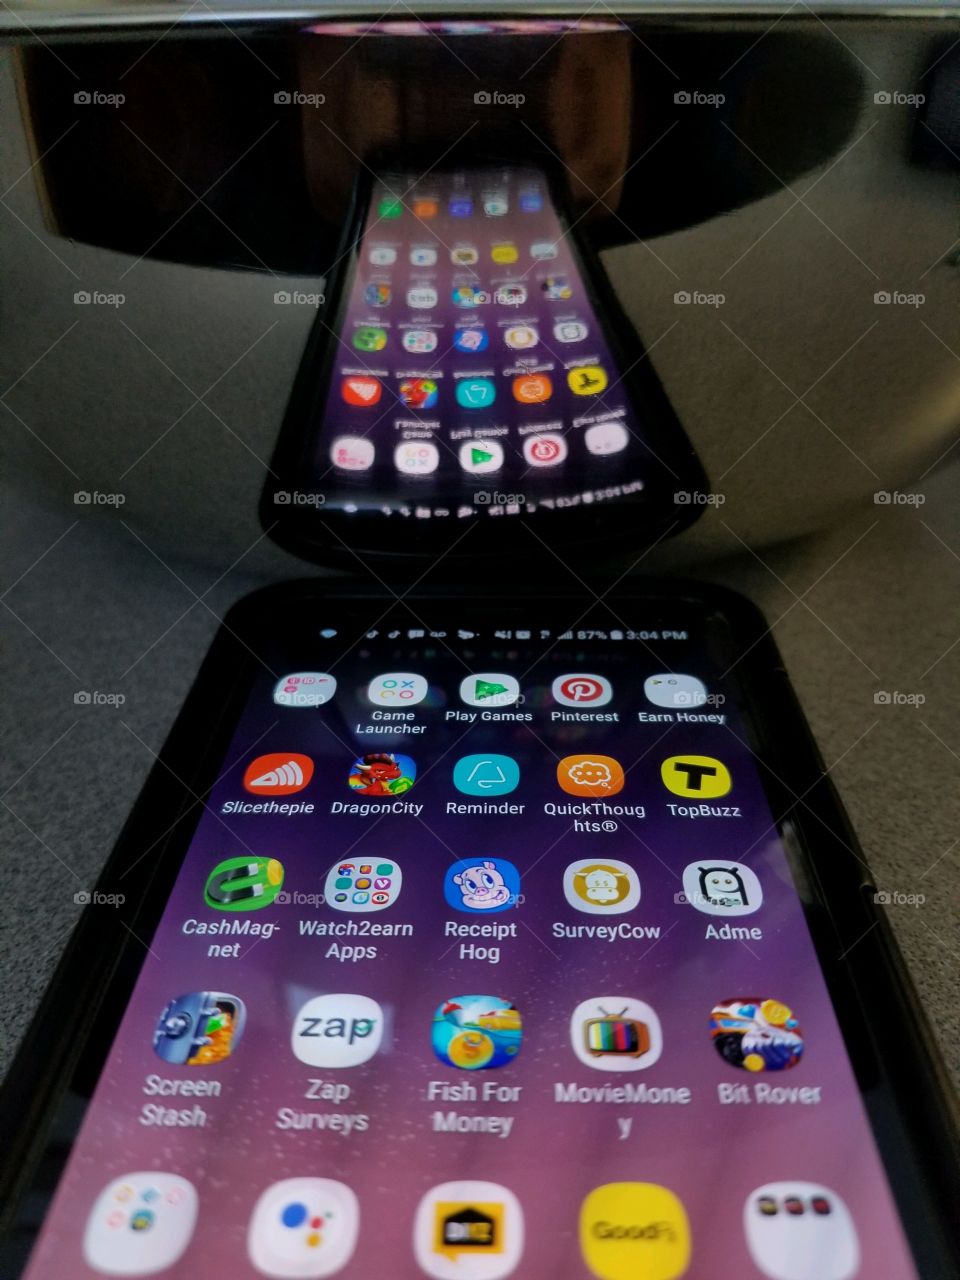 Here we have a reflection shot of a smart phone with many different apps. Refection shots can be fun to take find what you like and enjoy.